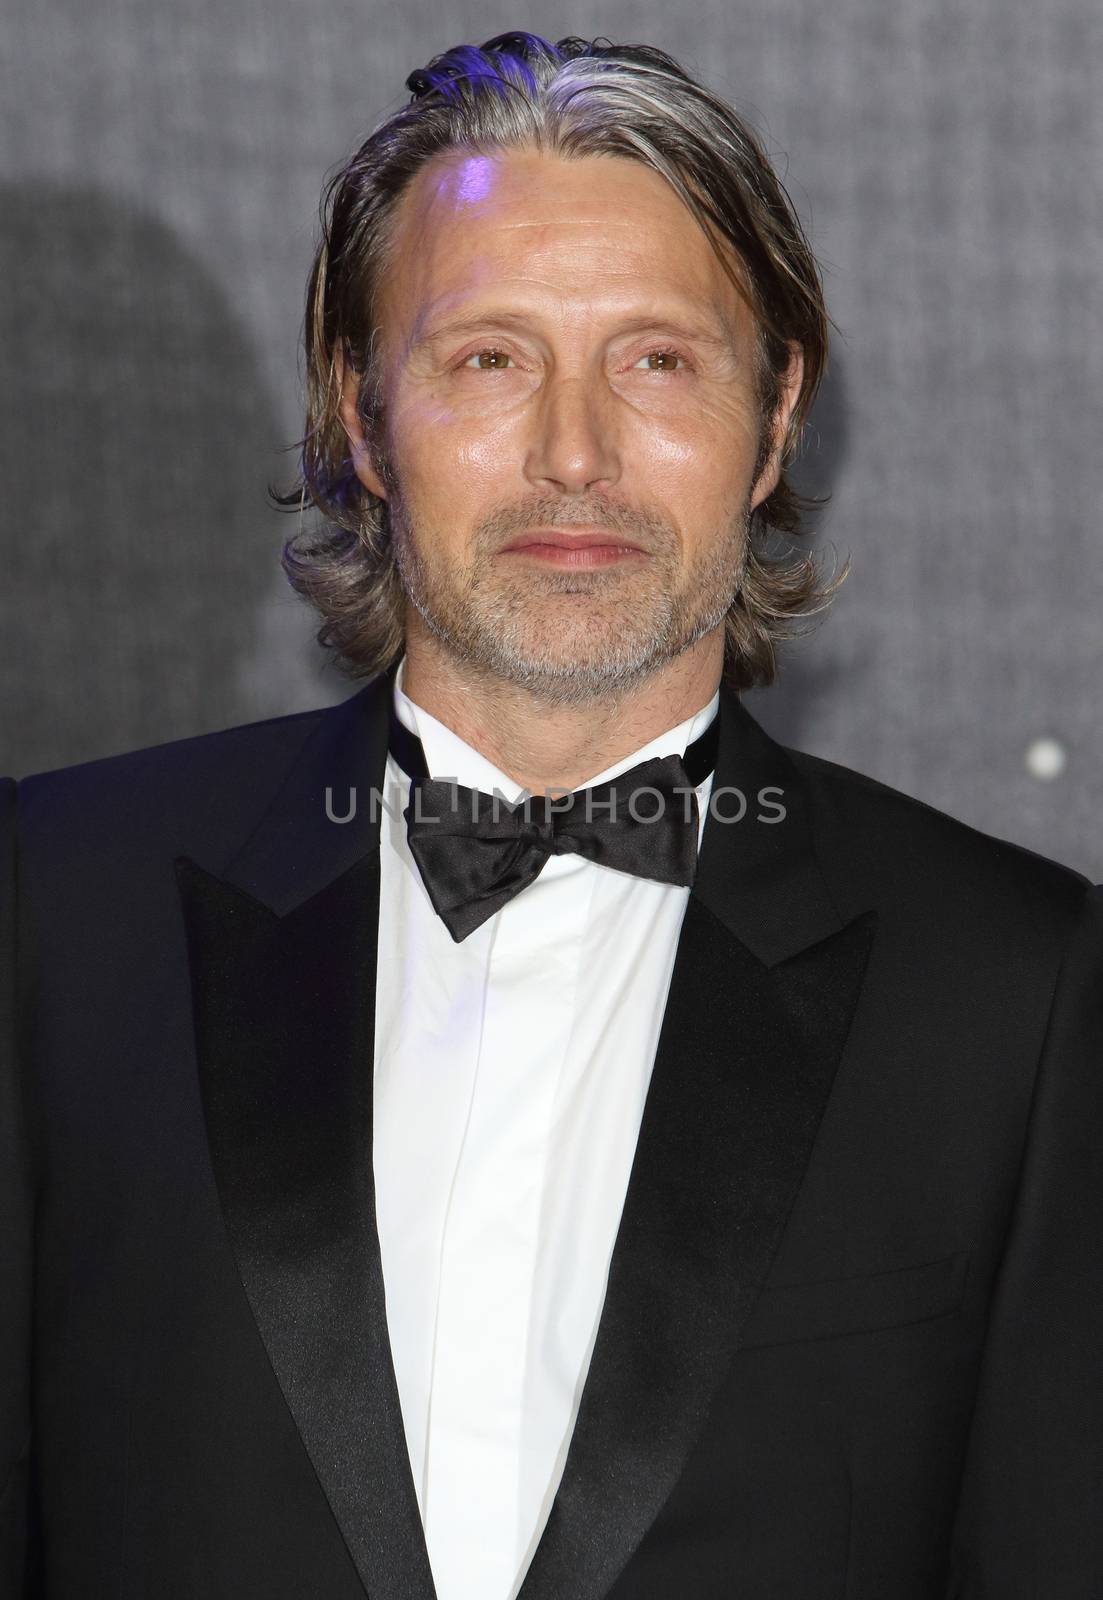 UNITED-KINGDOM, London : Danish famous actor Mads Dittmann Mikkelsen poses for photographers while Star Wars cast, crew and celebrities hit the red carpet for the last episode The Force Awakens European Premiere on December 16, 2015 in central London. The actor got cast in the Star Wars spinoff movie Star Wars: Rogue One.   	